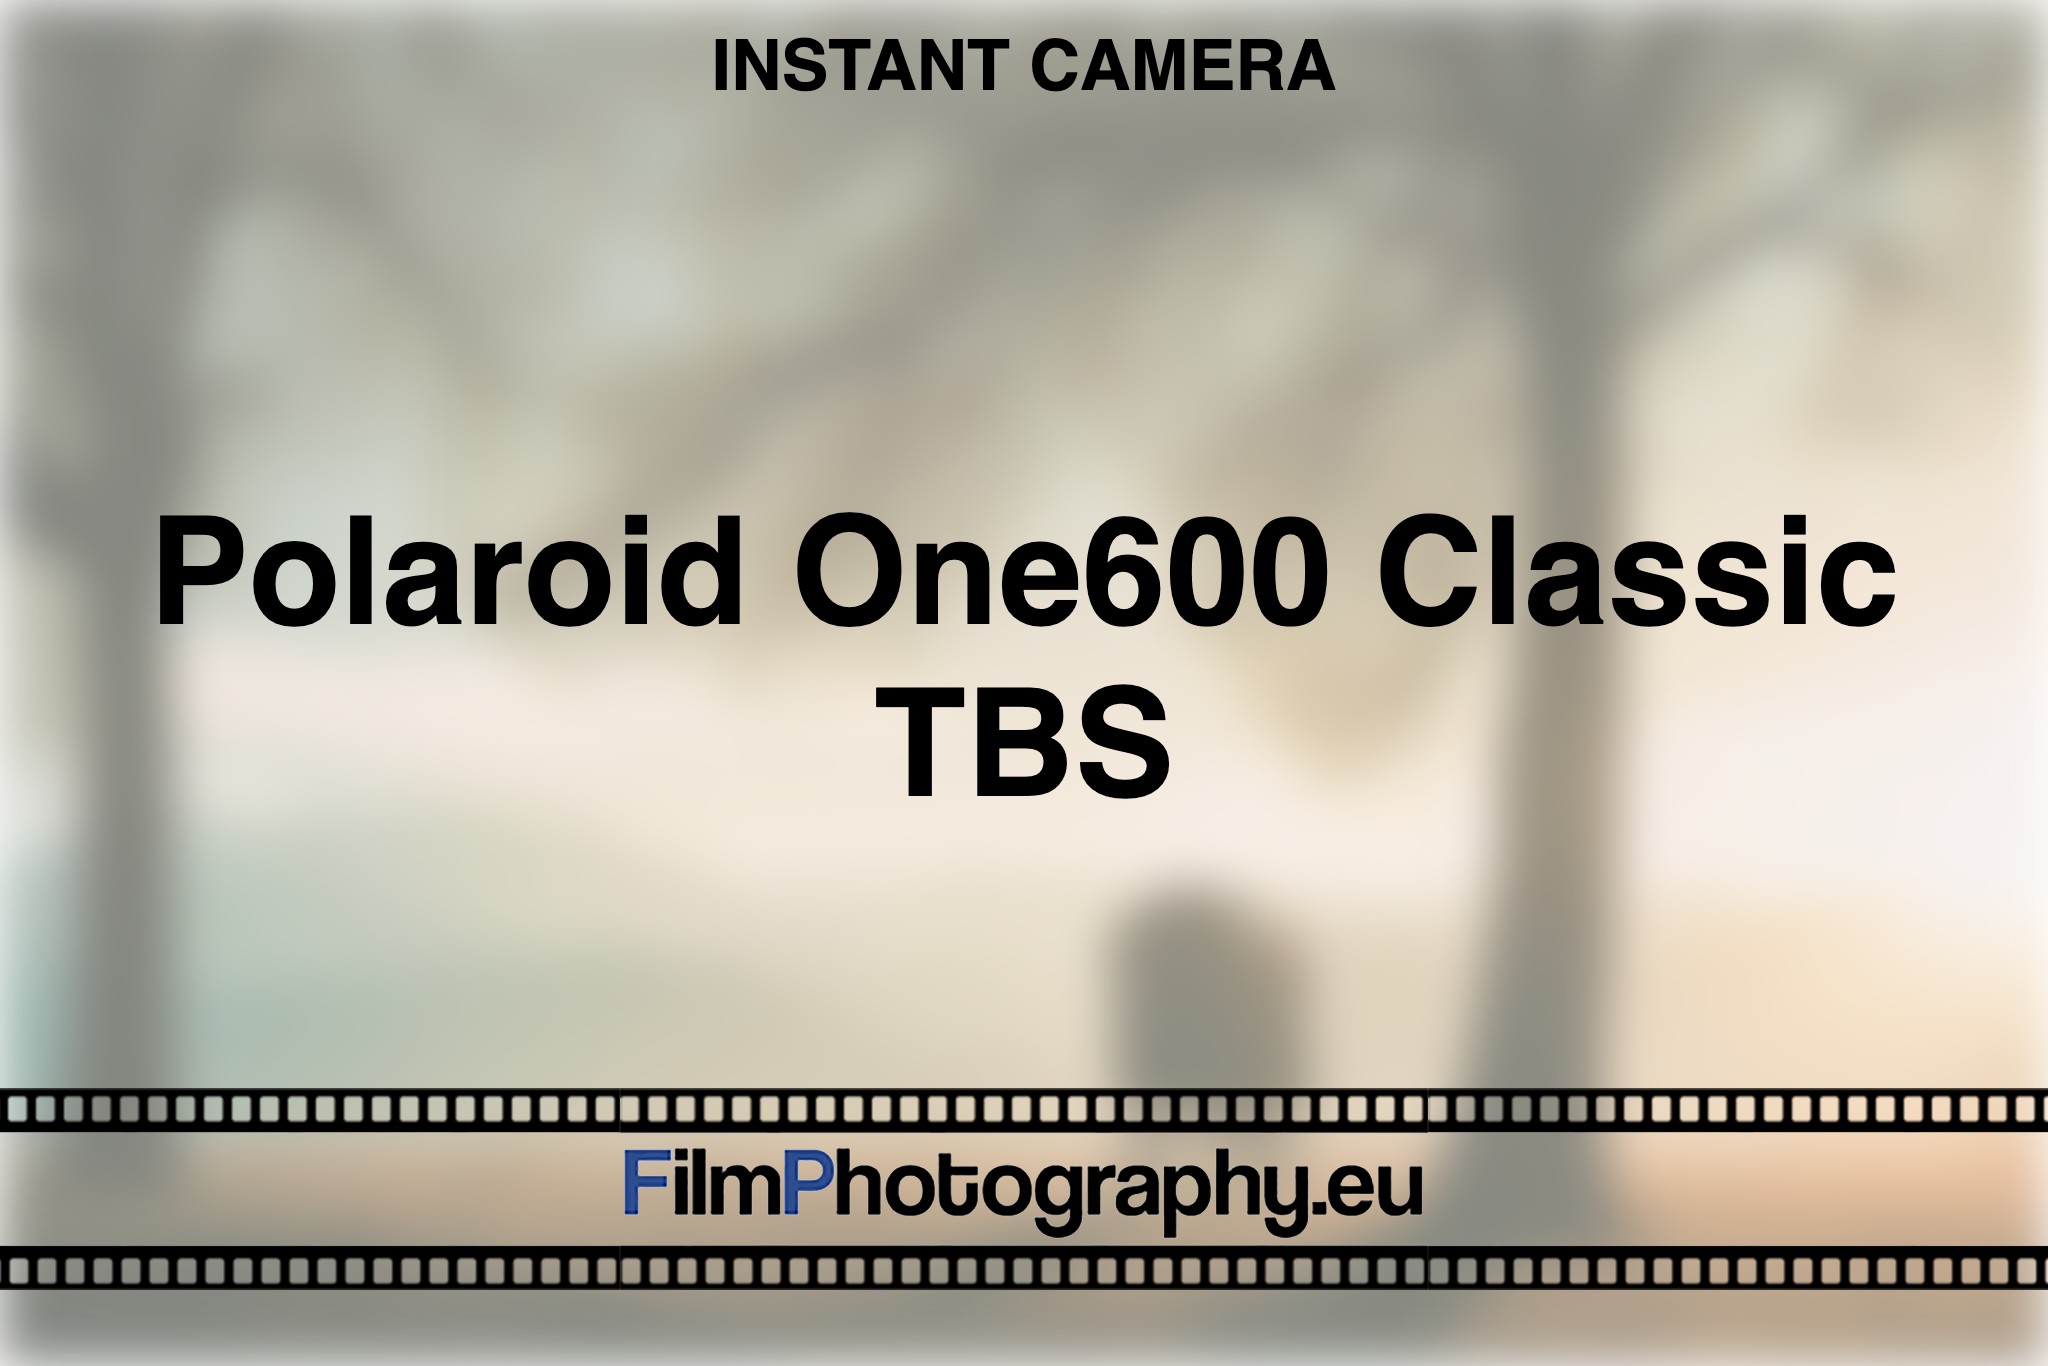 polaroid-one600-classic-tbs-instant-camera-bnv